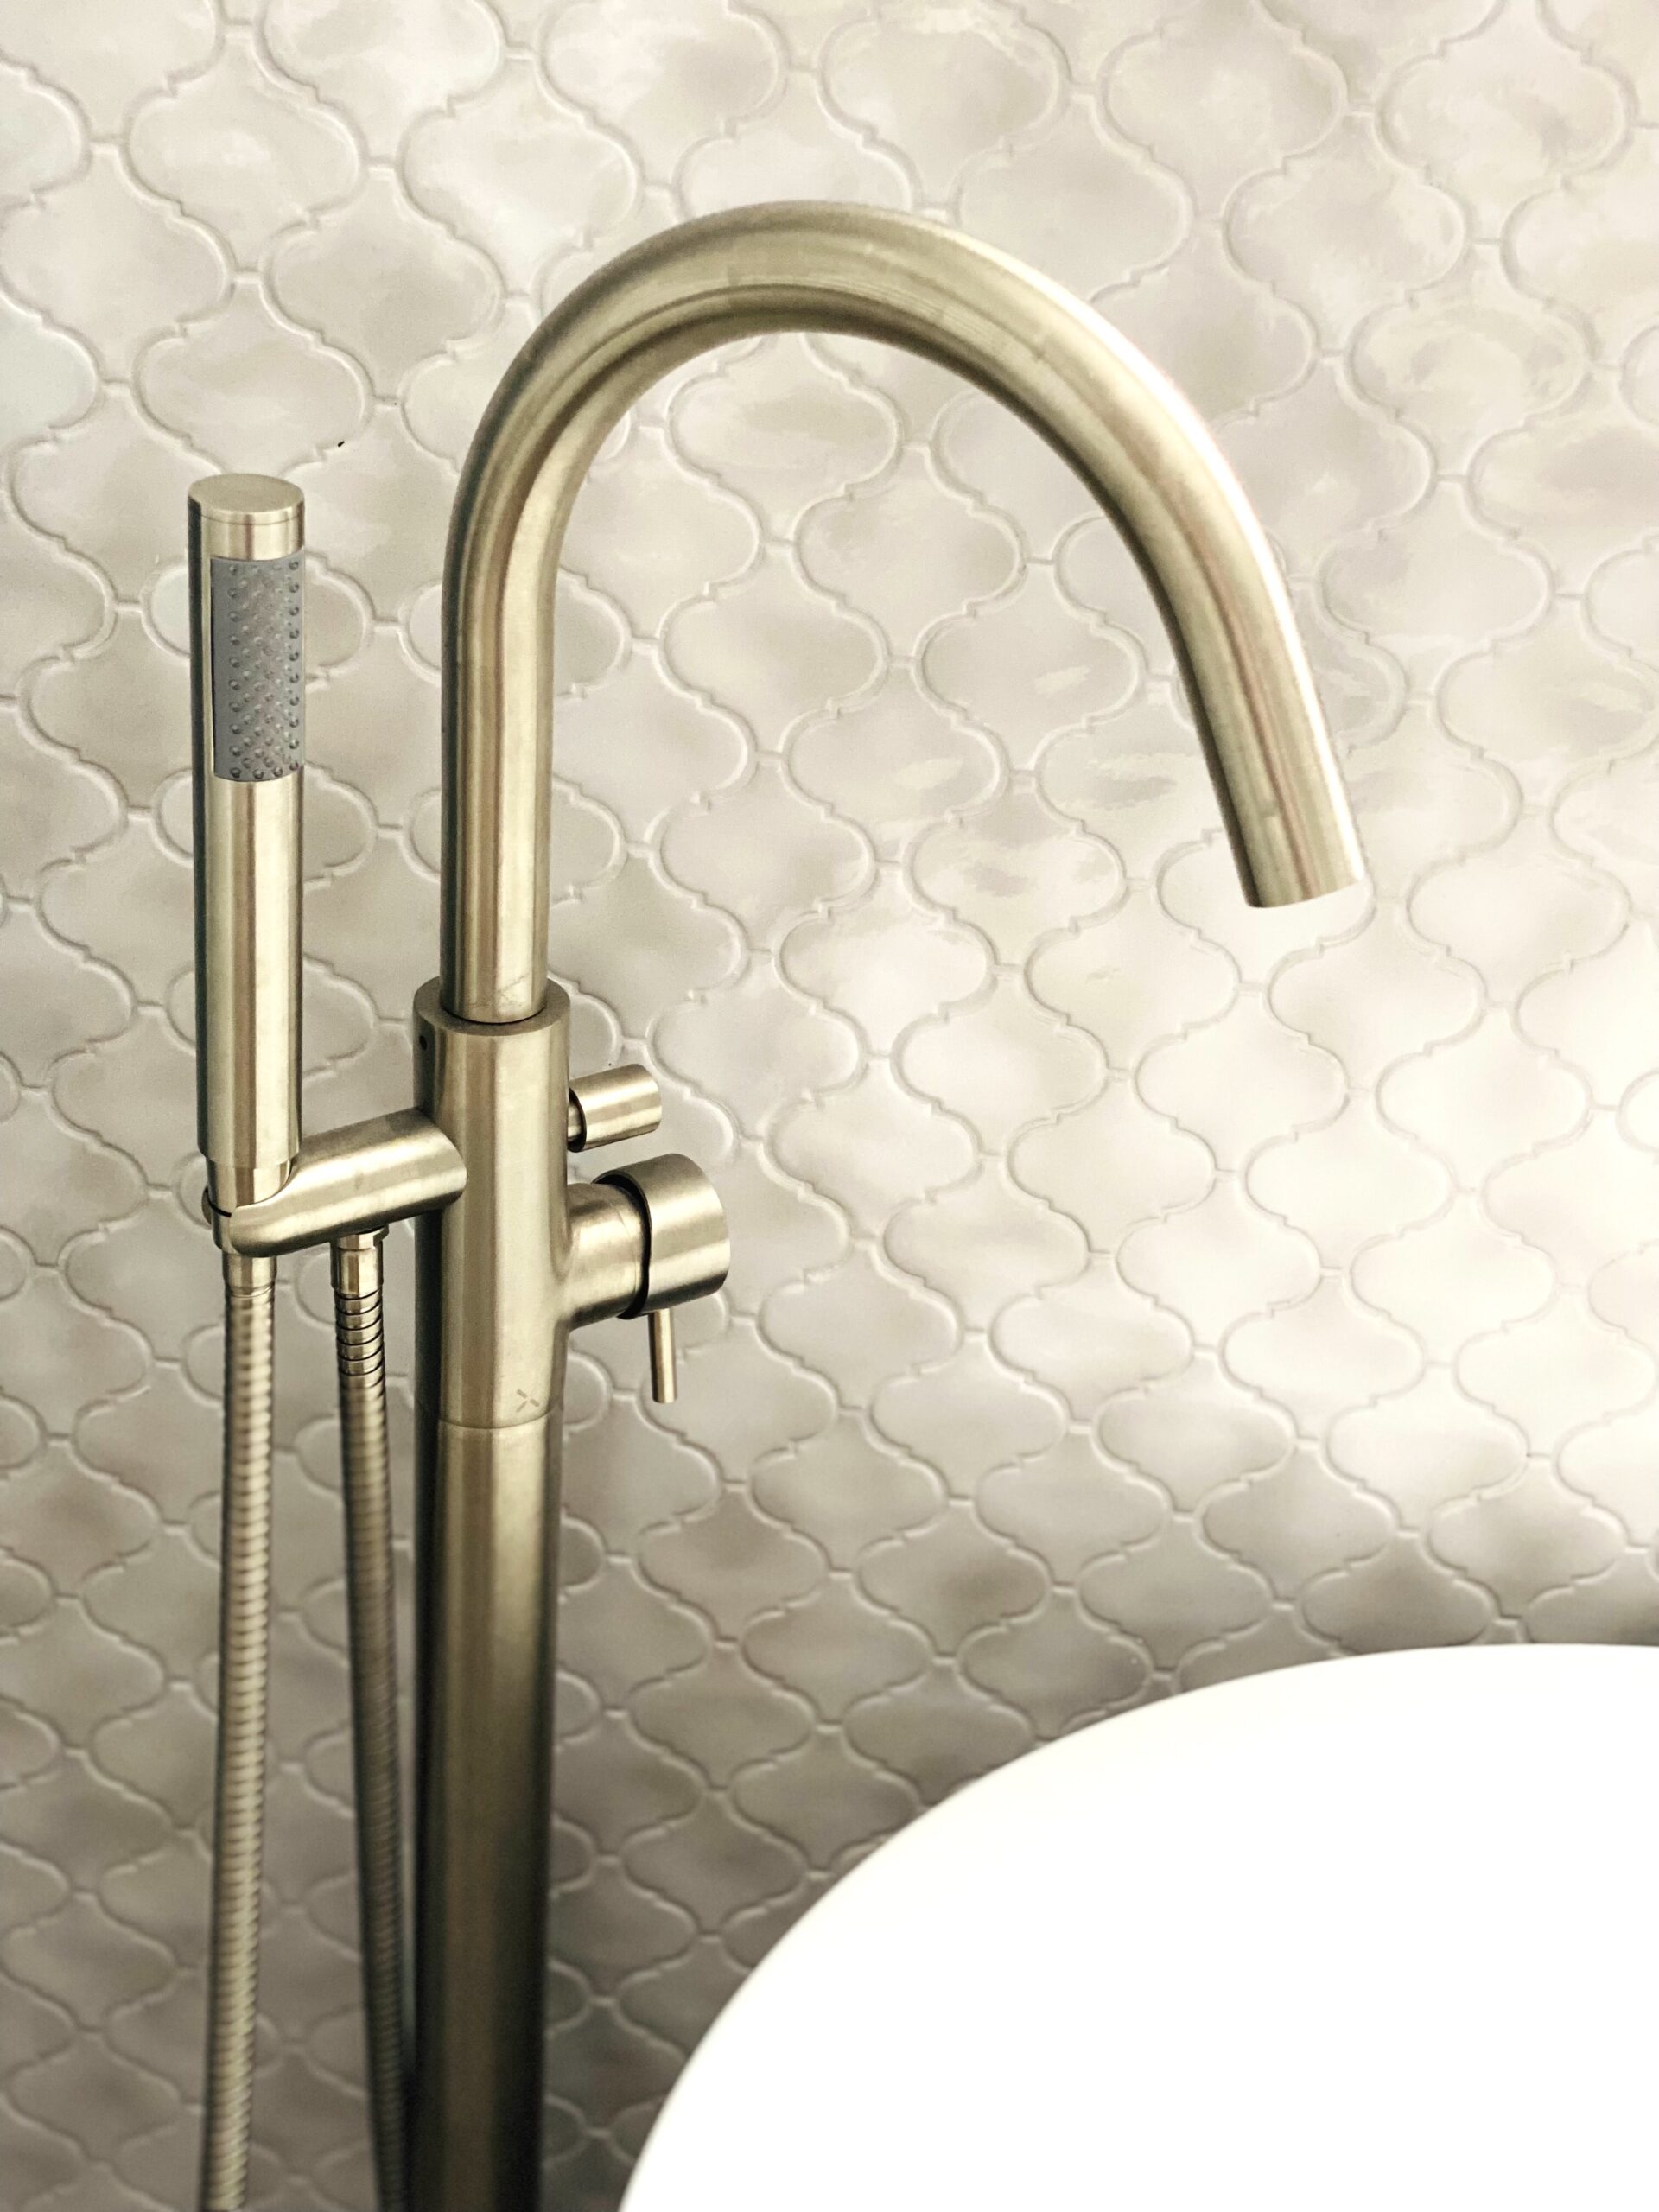 detailing choices on the taps chosen to complement the bathroom